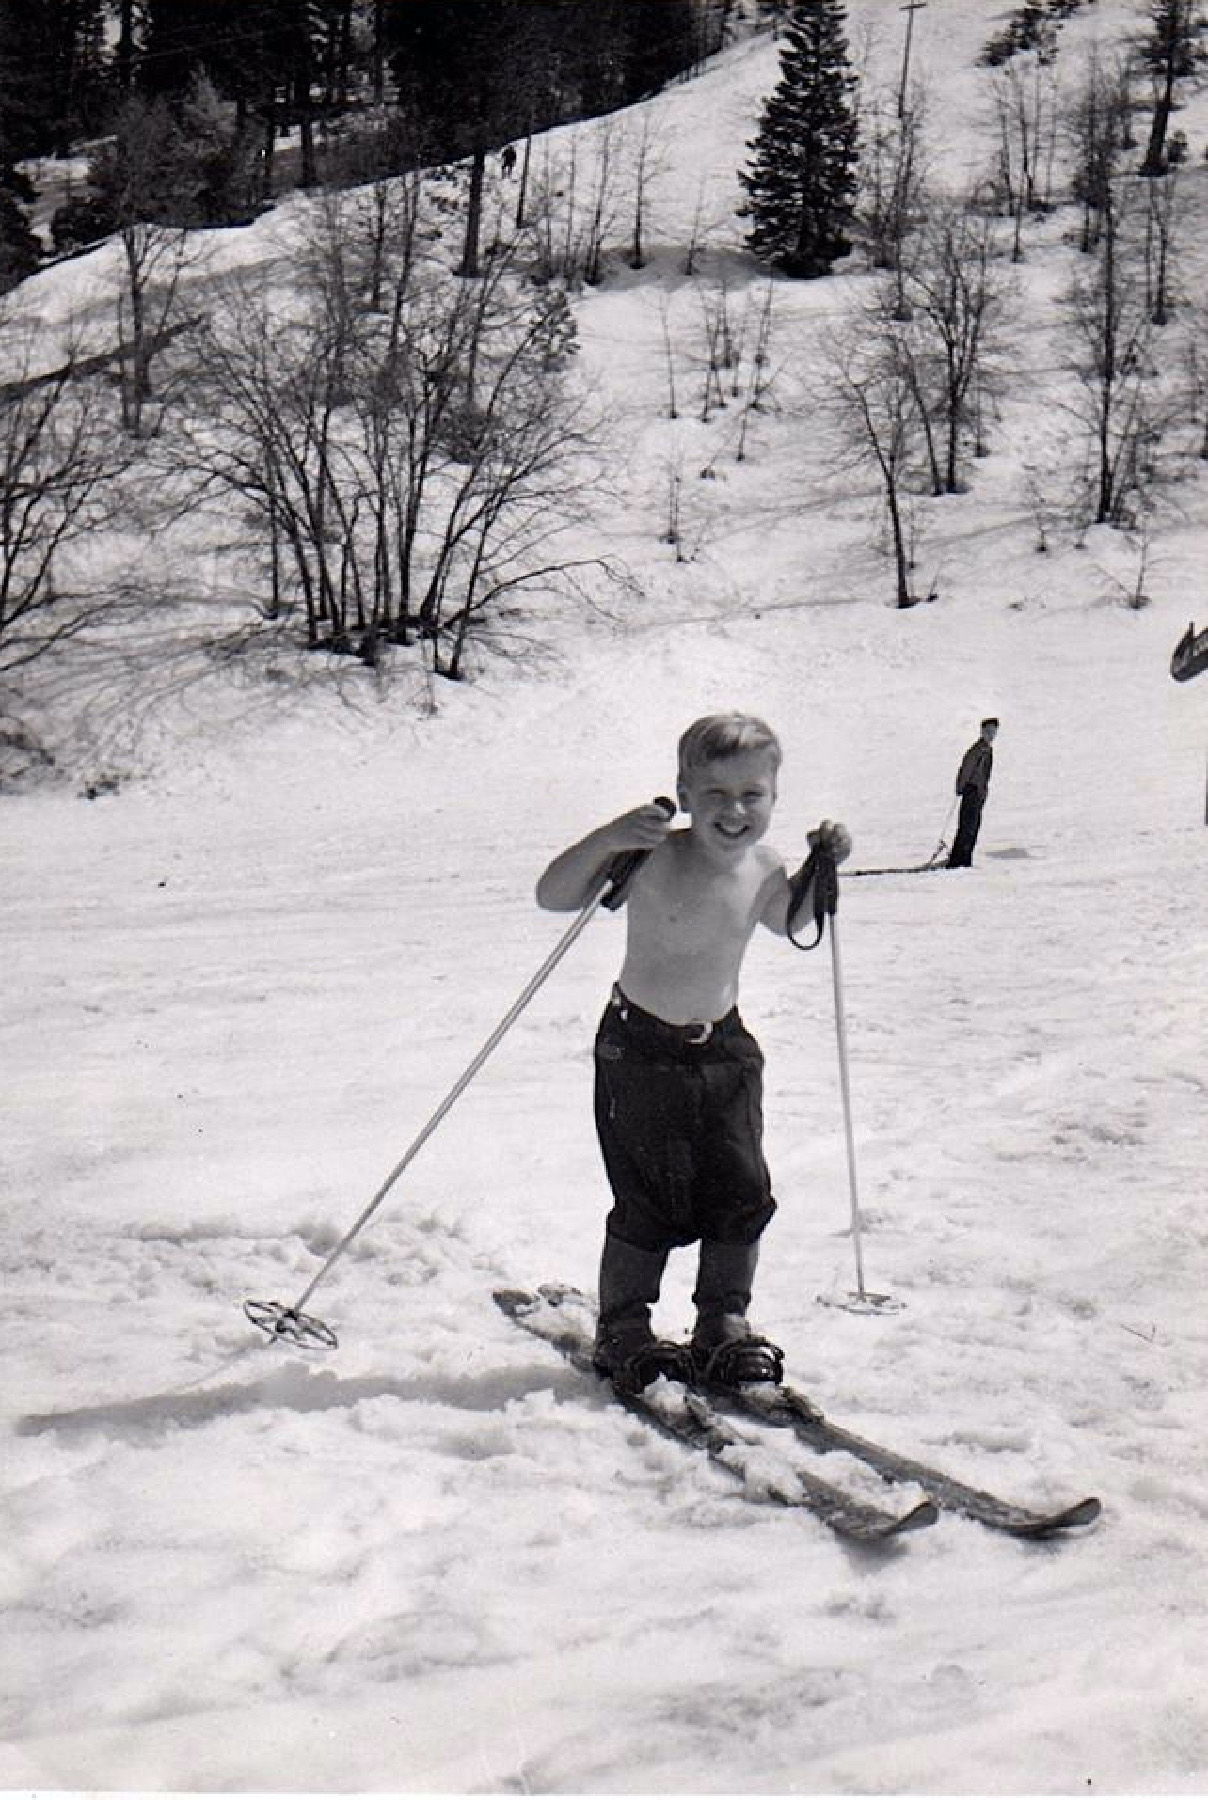 The author learns to ski as a child in Southern California.